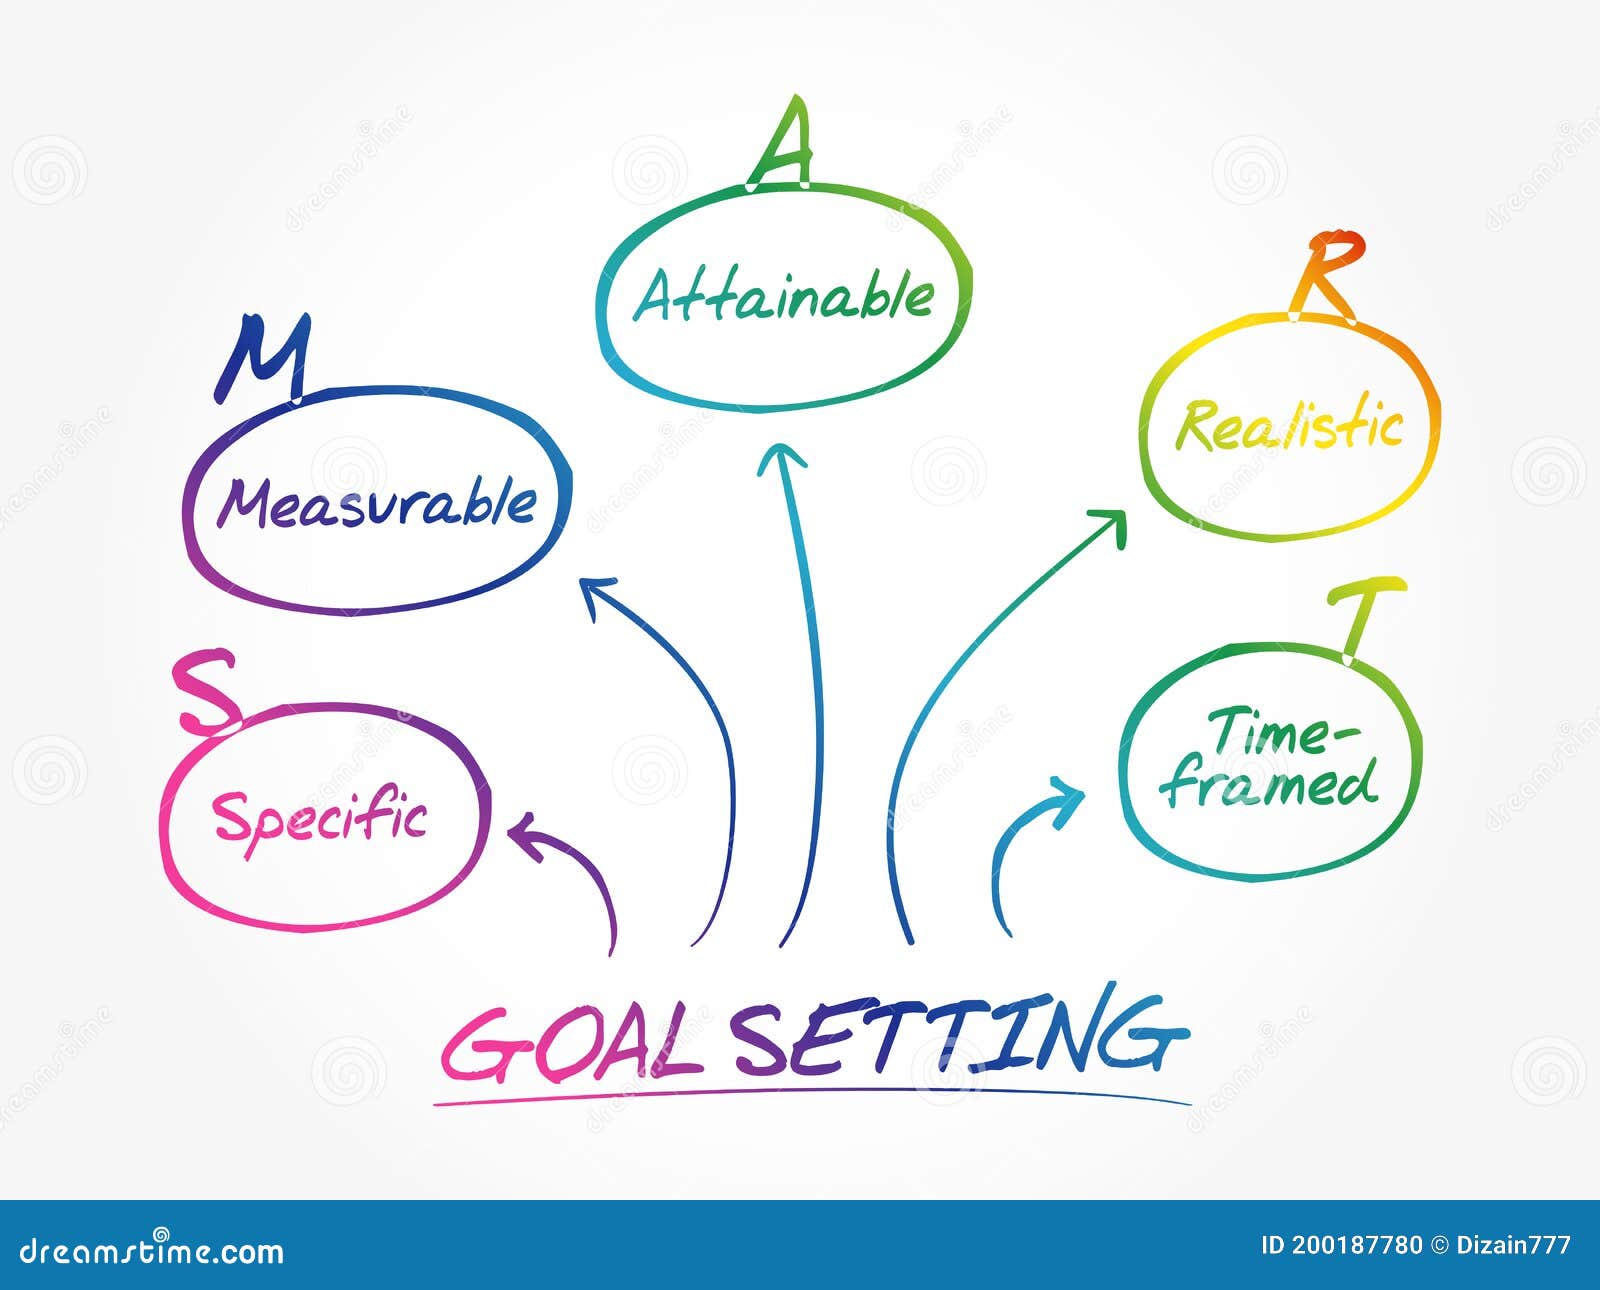  A diagram of the goal-setting process, with the main goal of SMART (Specific, Measurable, Achievable, Realistic, and Time-framed) in the center, and related words Measurable, Specific, Attainable, Realistic, and Time-framed around it.